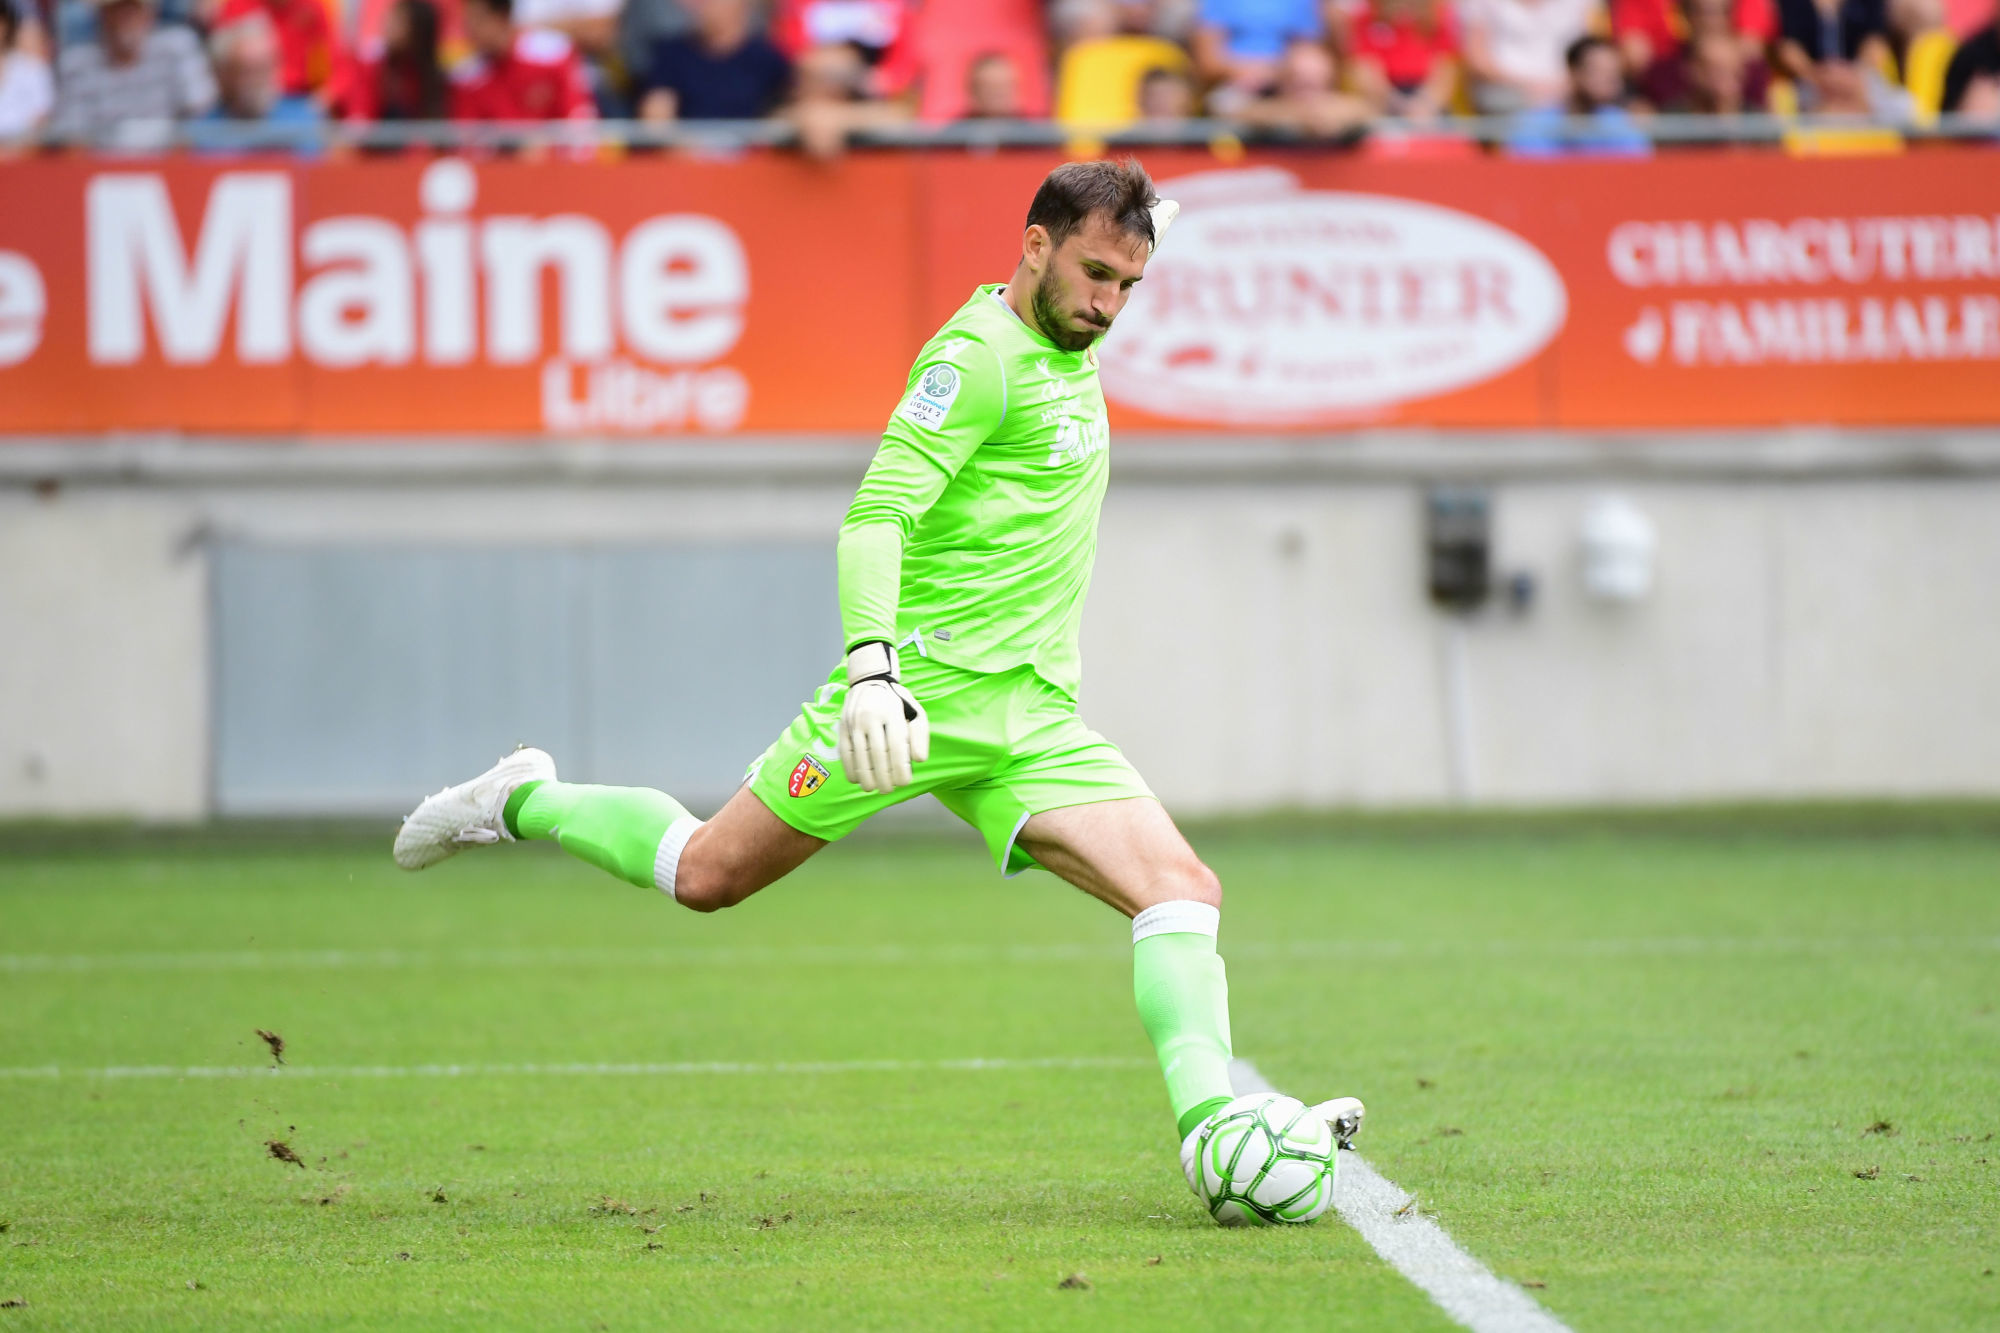 Thomas Vincensini of Lens during the Ligue 2 match between Le Mans and RC Lens on July 27, 2019 in Le Mans, France. (Photo by Dave Winter/Icon Sport)